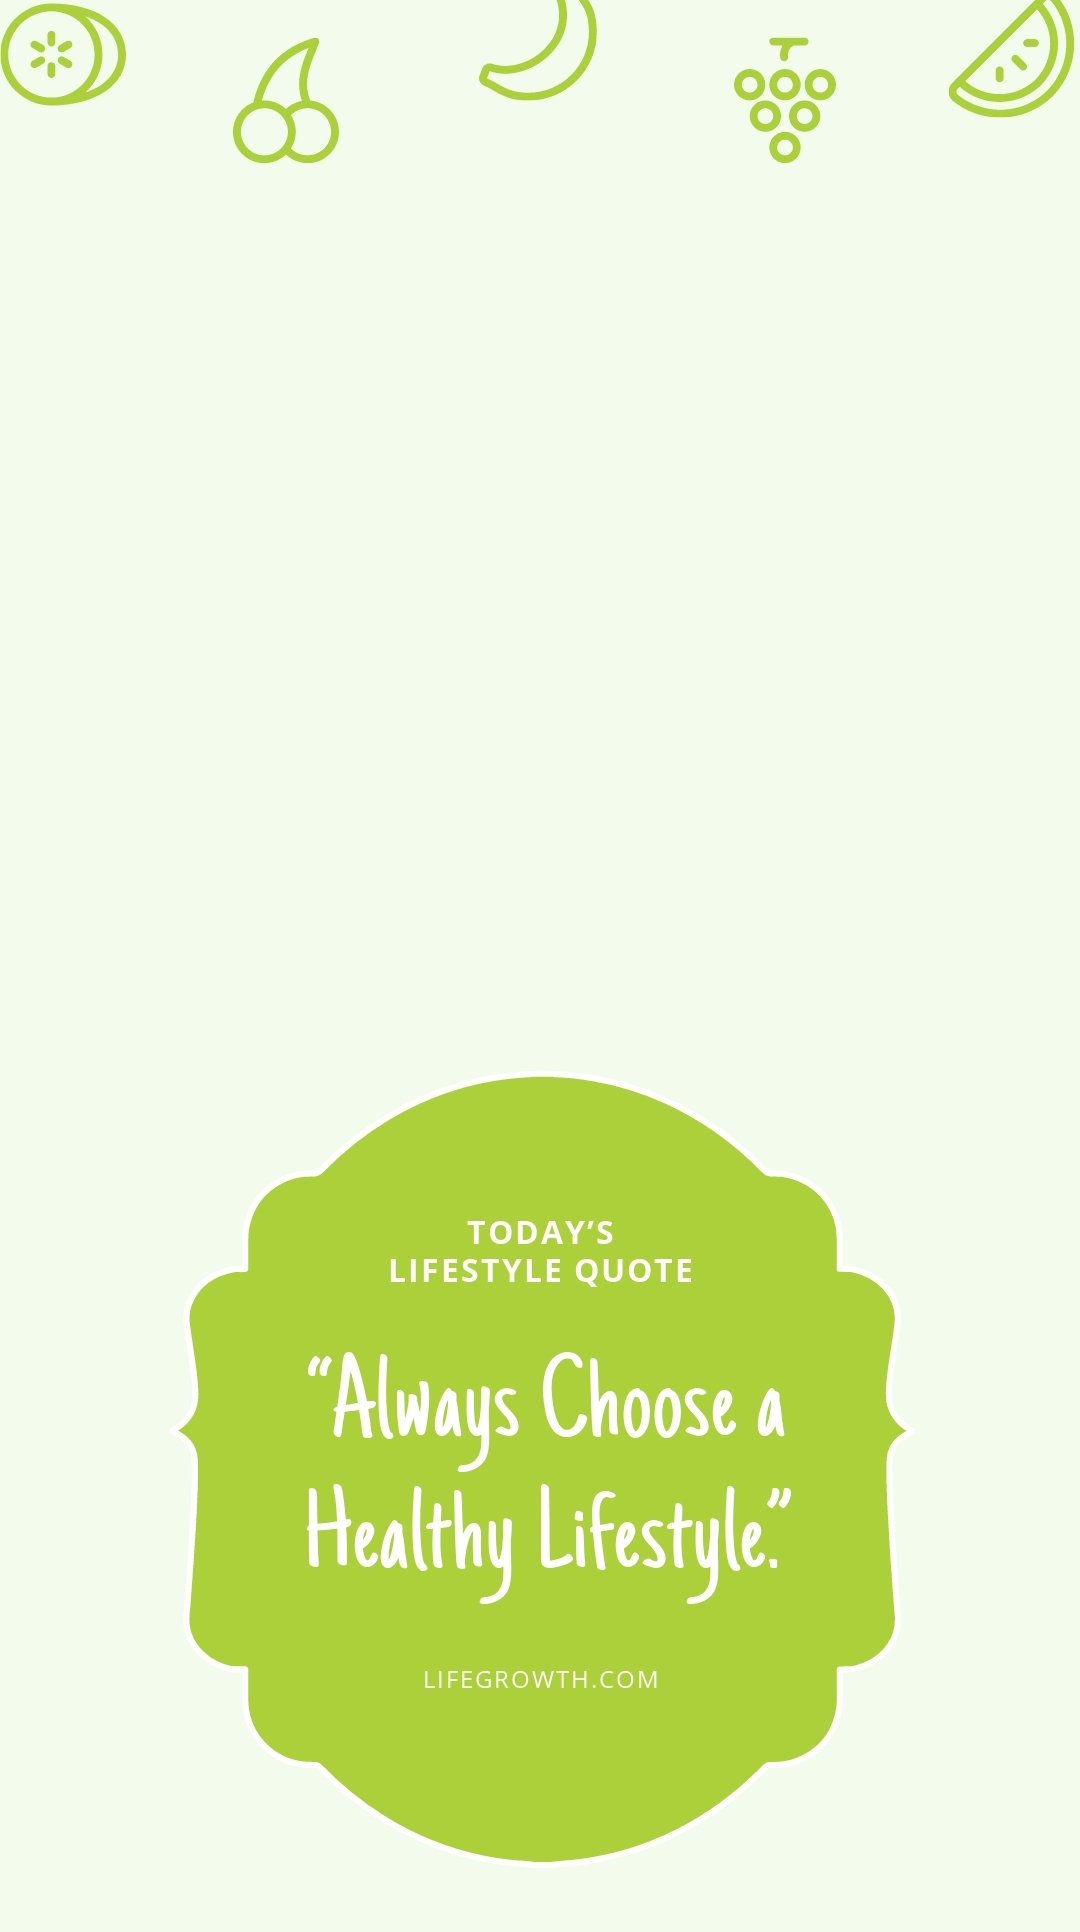 Free Lifestyle Quote Snapchat Geofilter Template